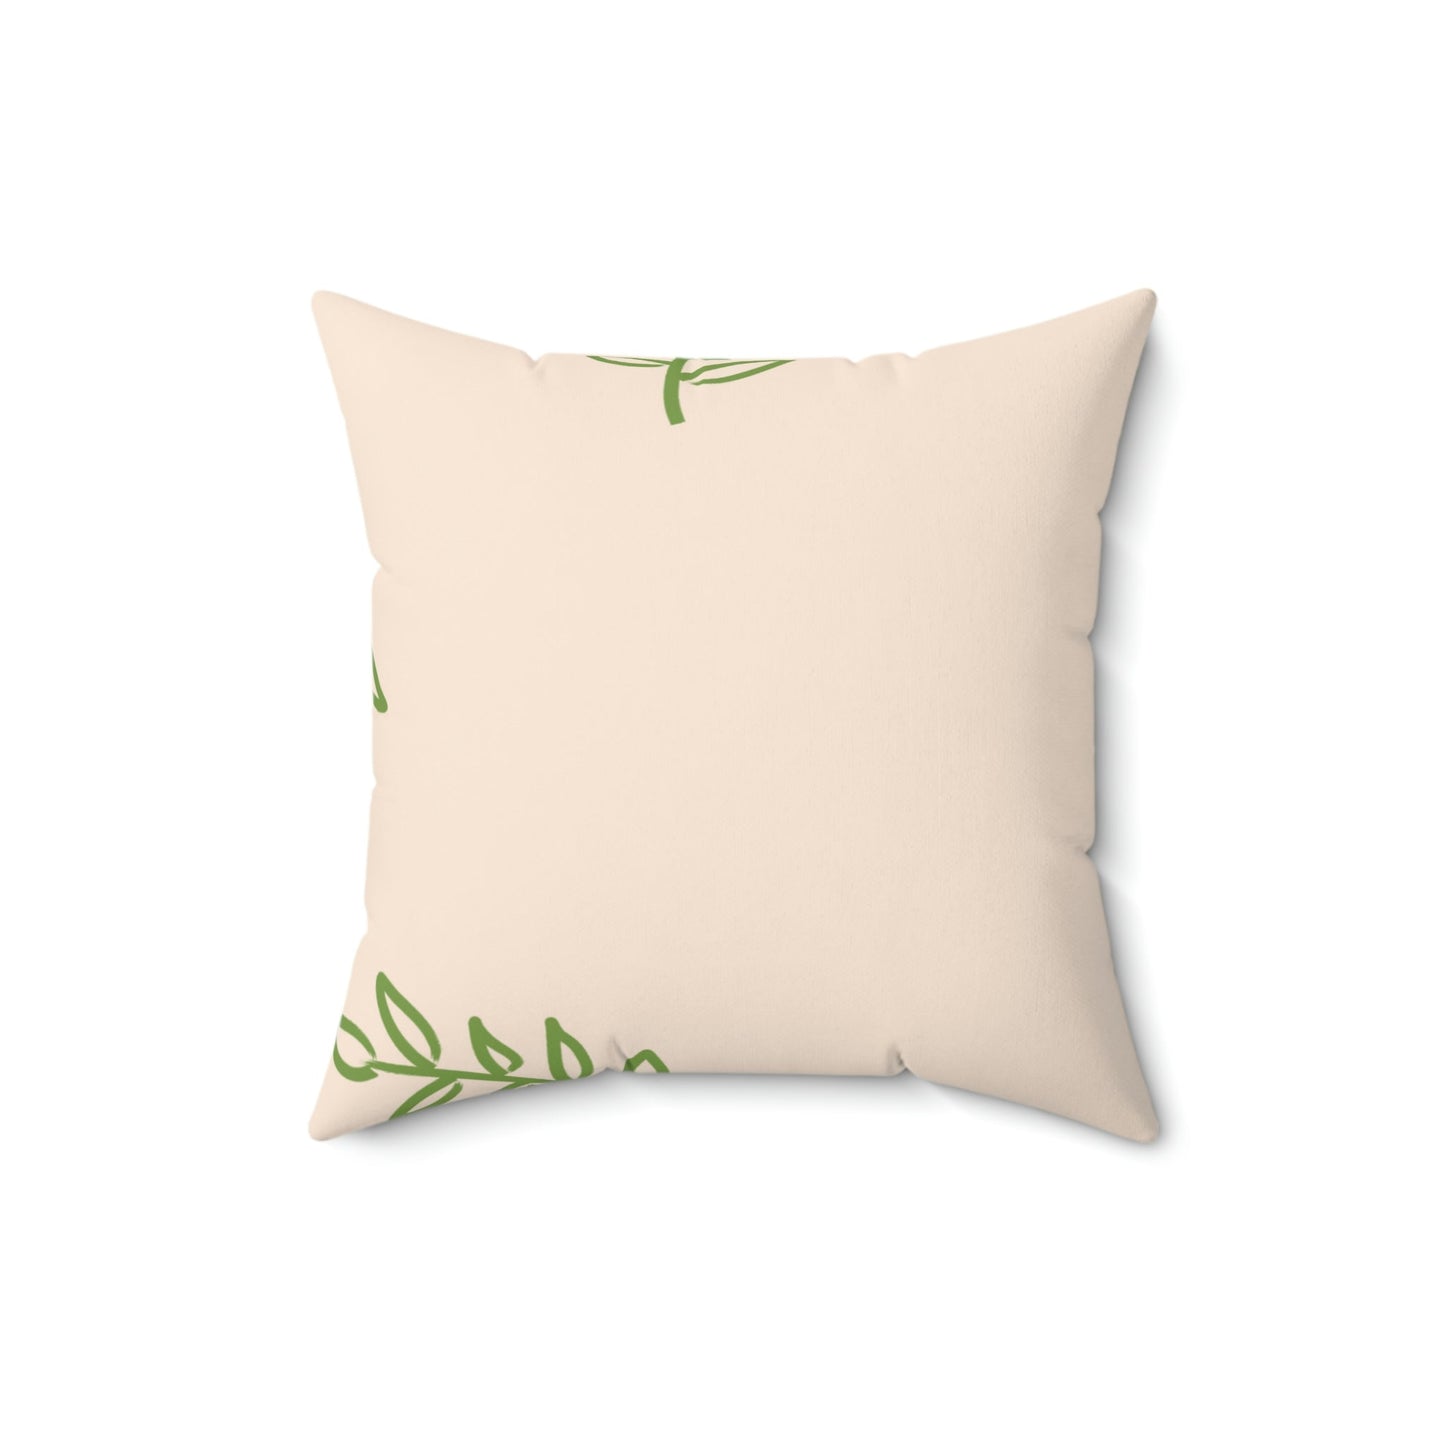 Touch of Greenery Square Pillow Home Decor Pink Sweetheart